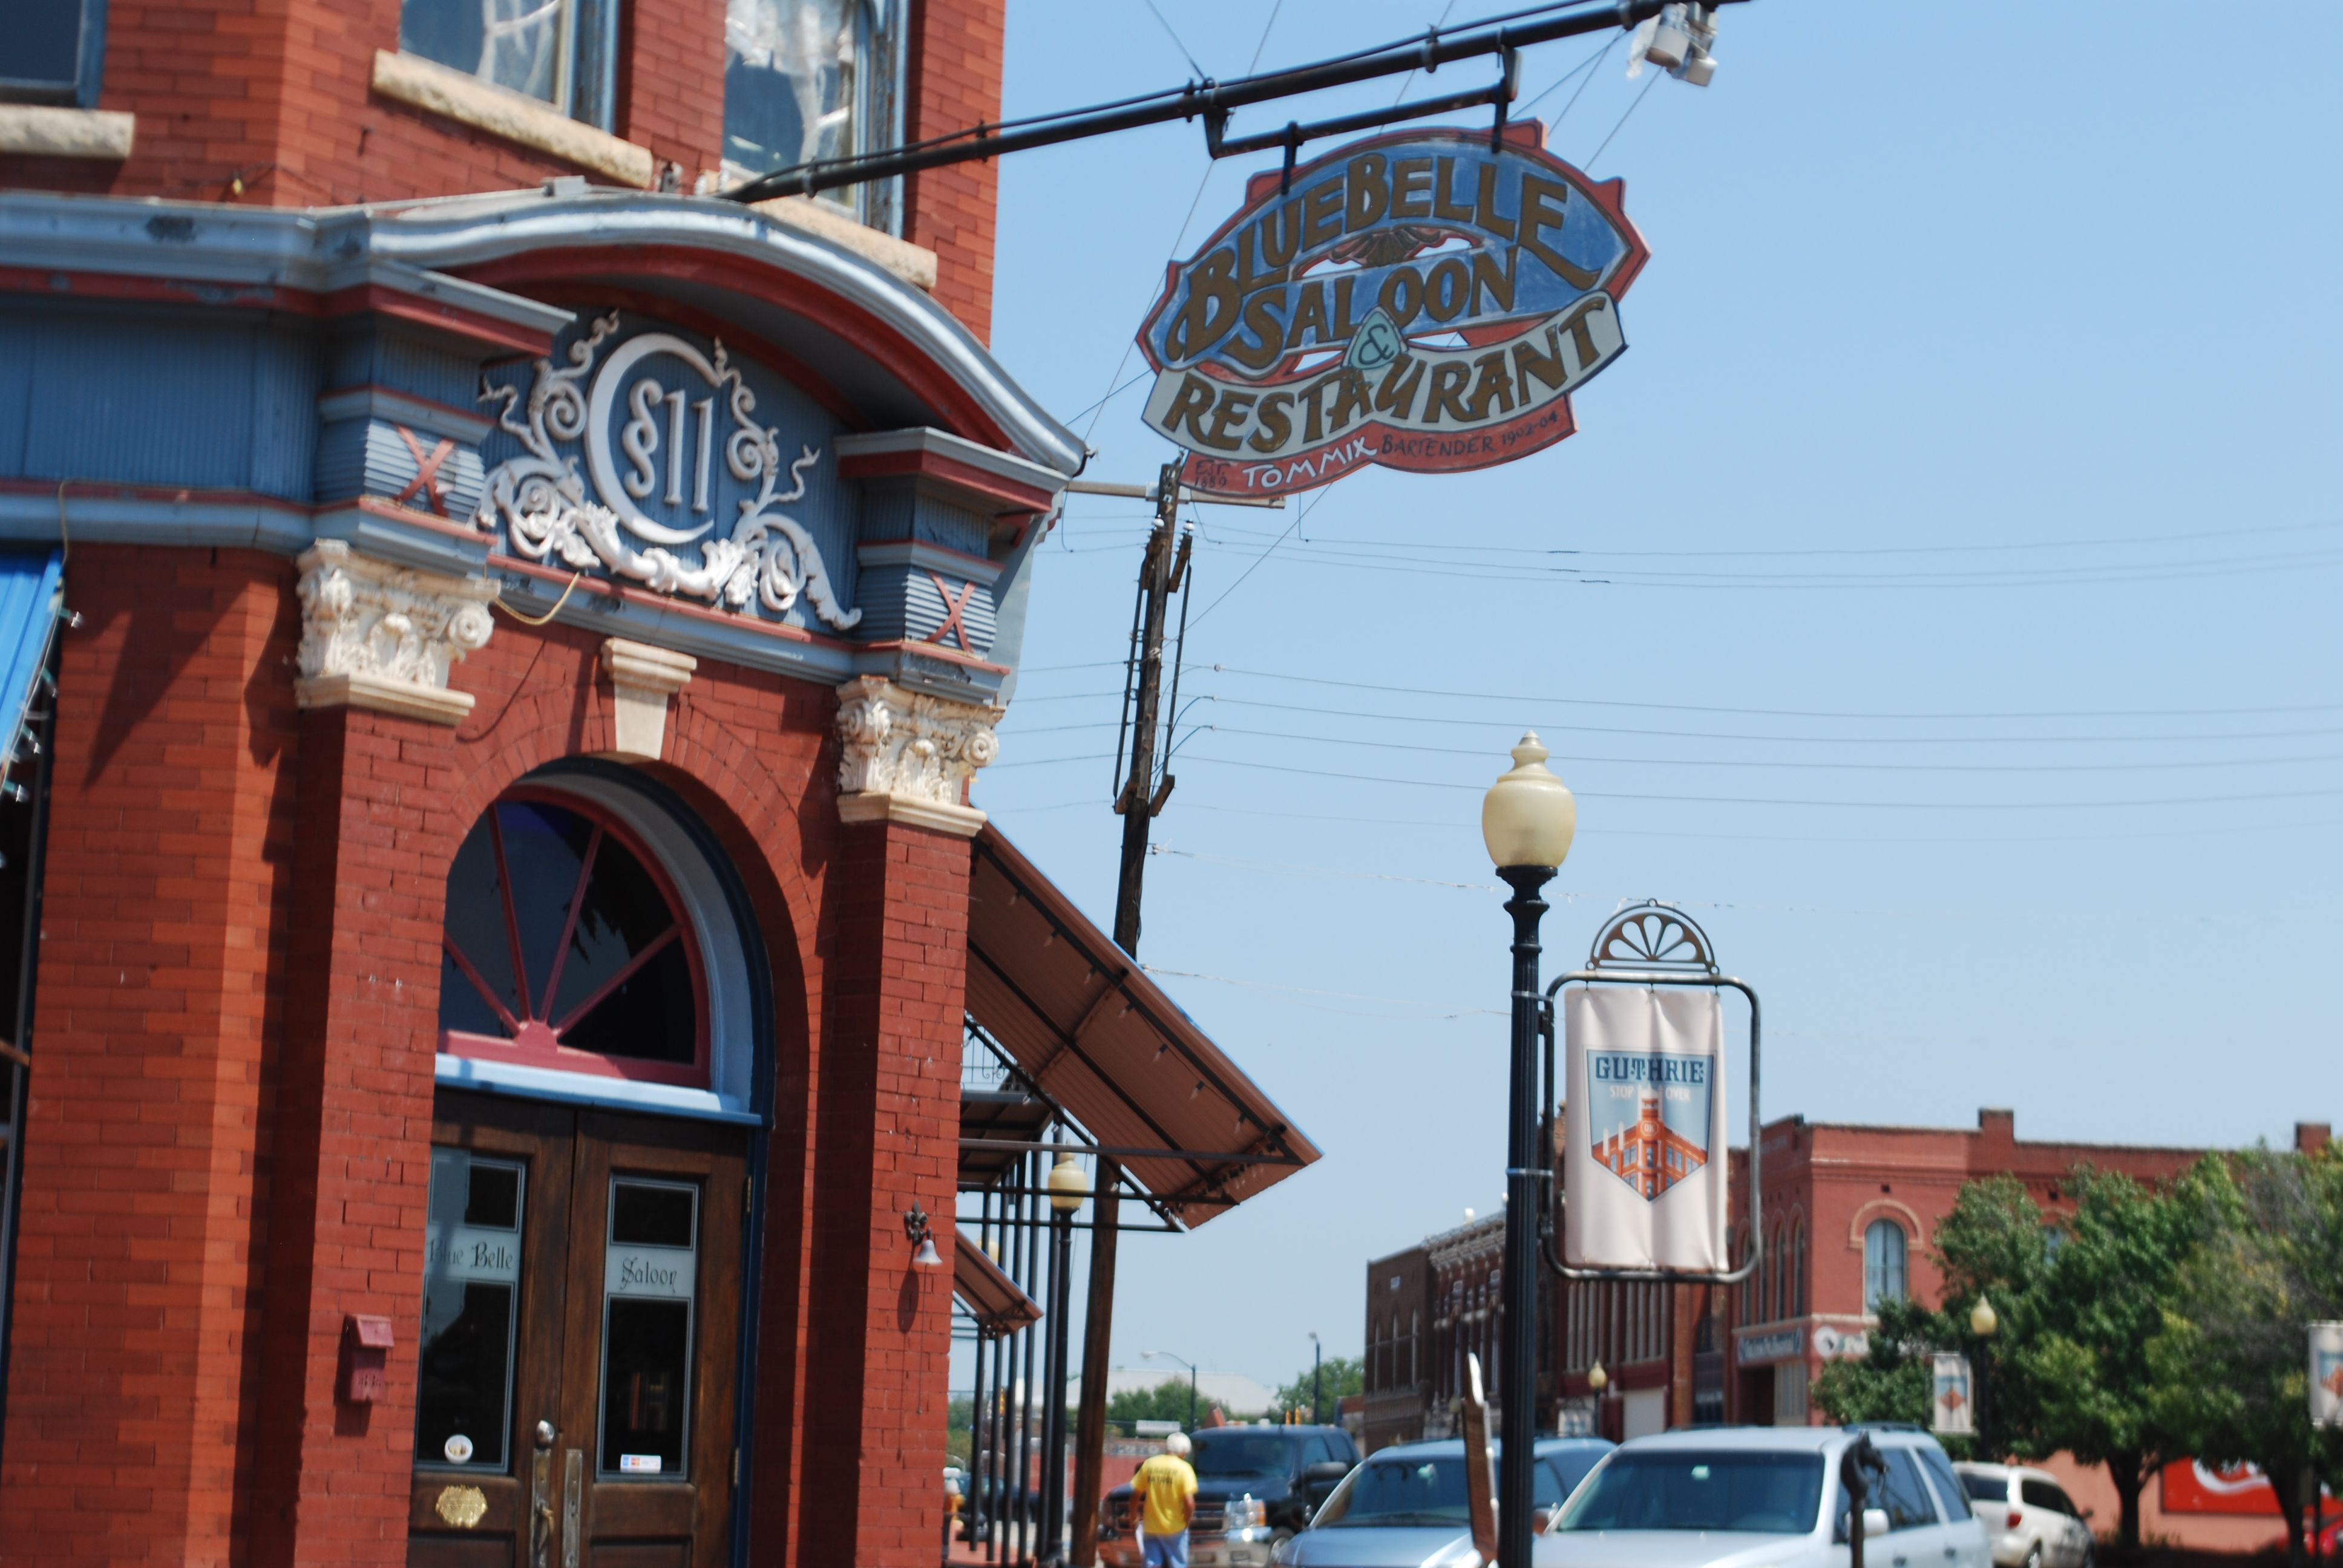 The Bluebelle Saloon in Guthrie, Oklahoma has new owners and management. 